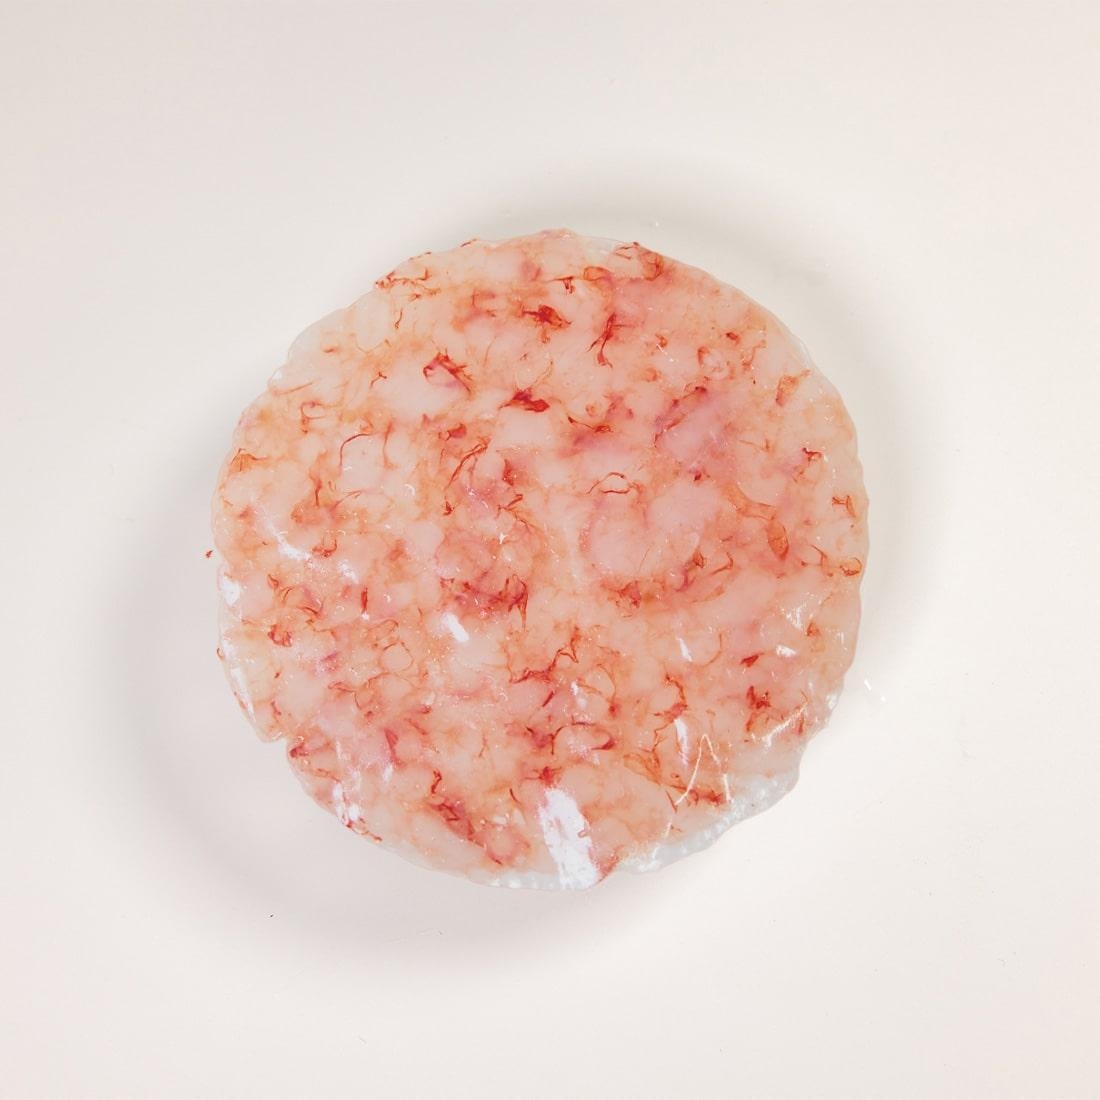 Red King Prawn Carpaccio from Mazara del Vallo, 5 packs of 50g each - Cover Image